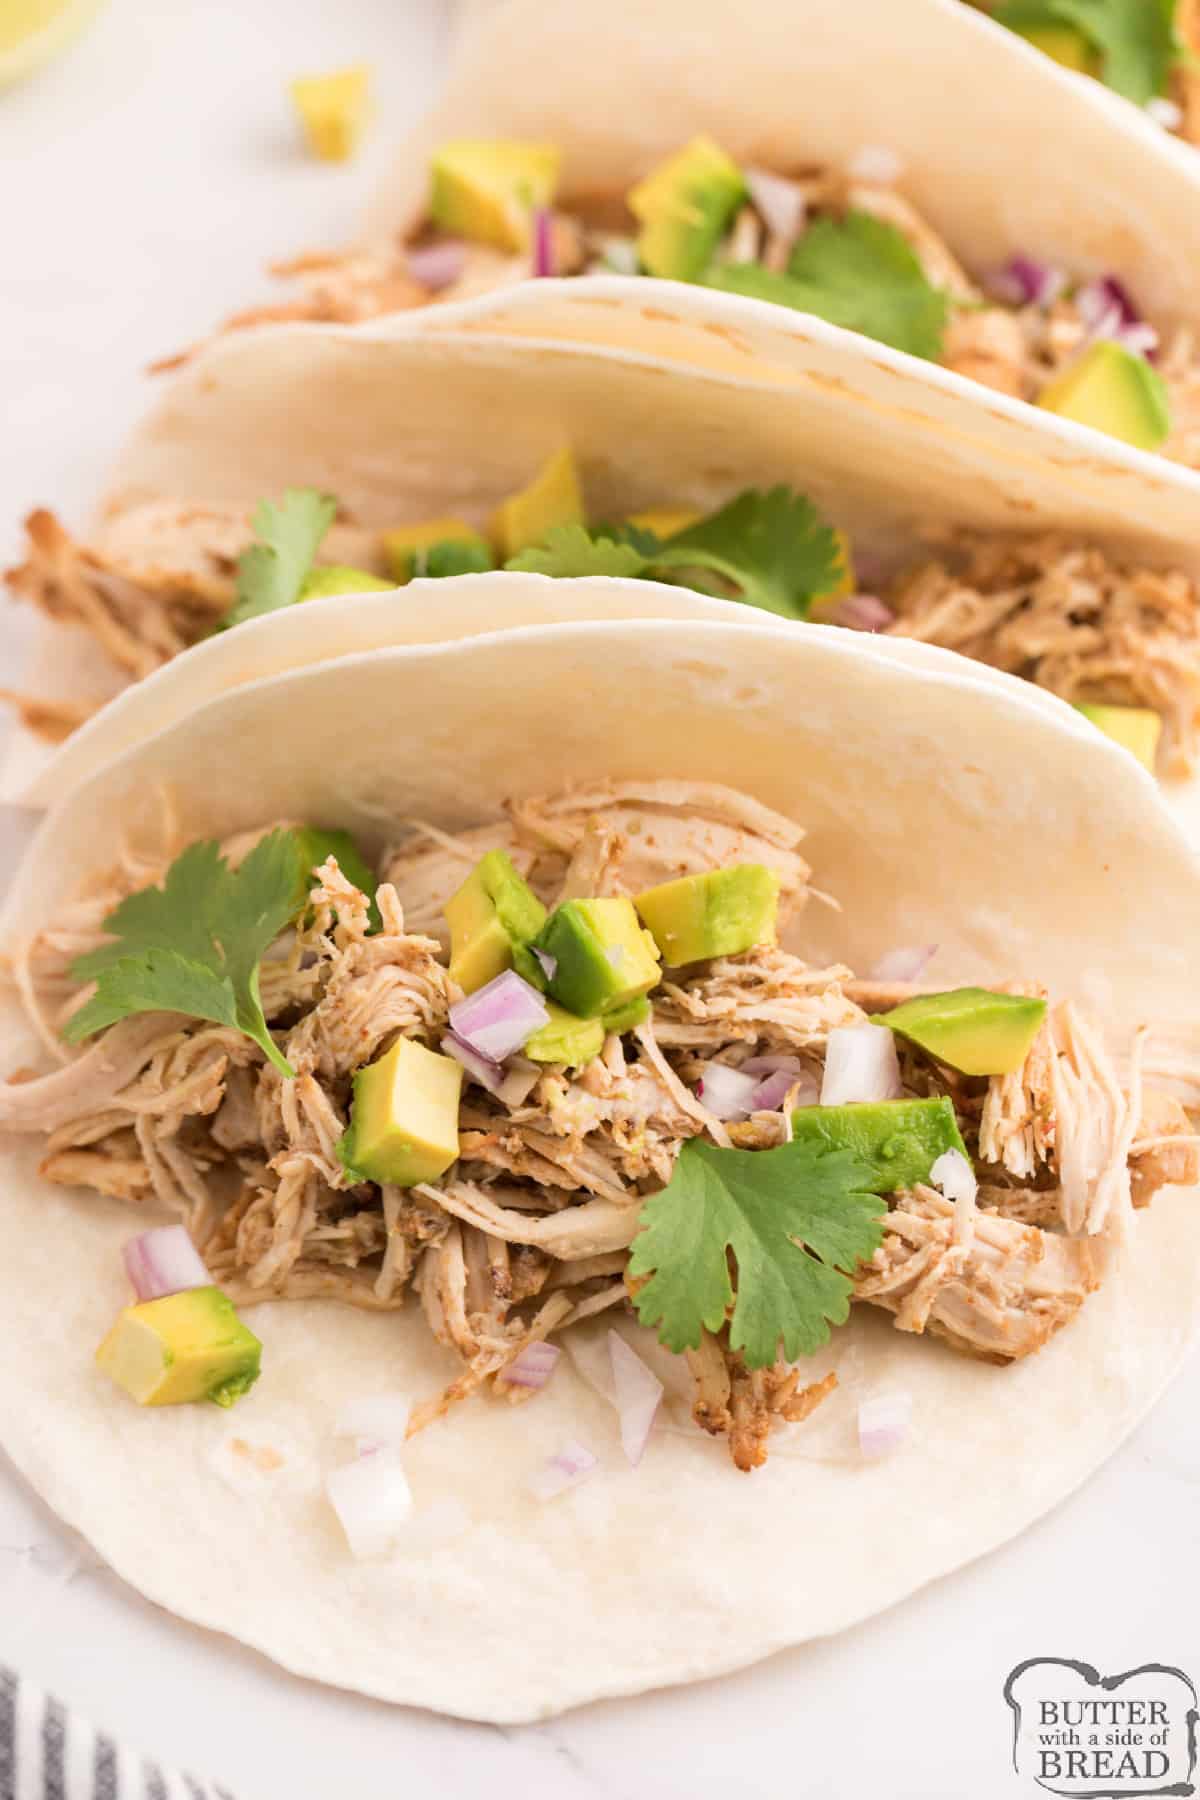 Slow cooker chicken recipe for tacos and burritos